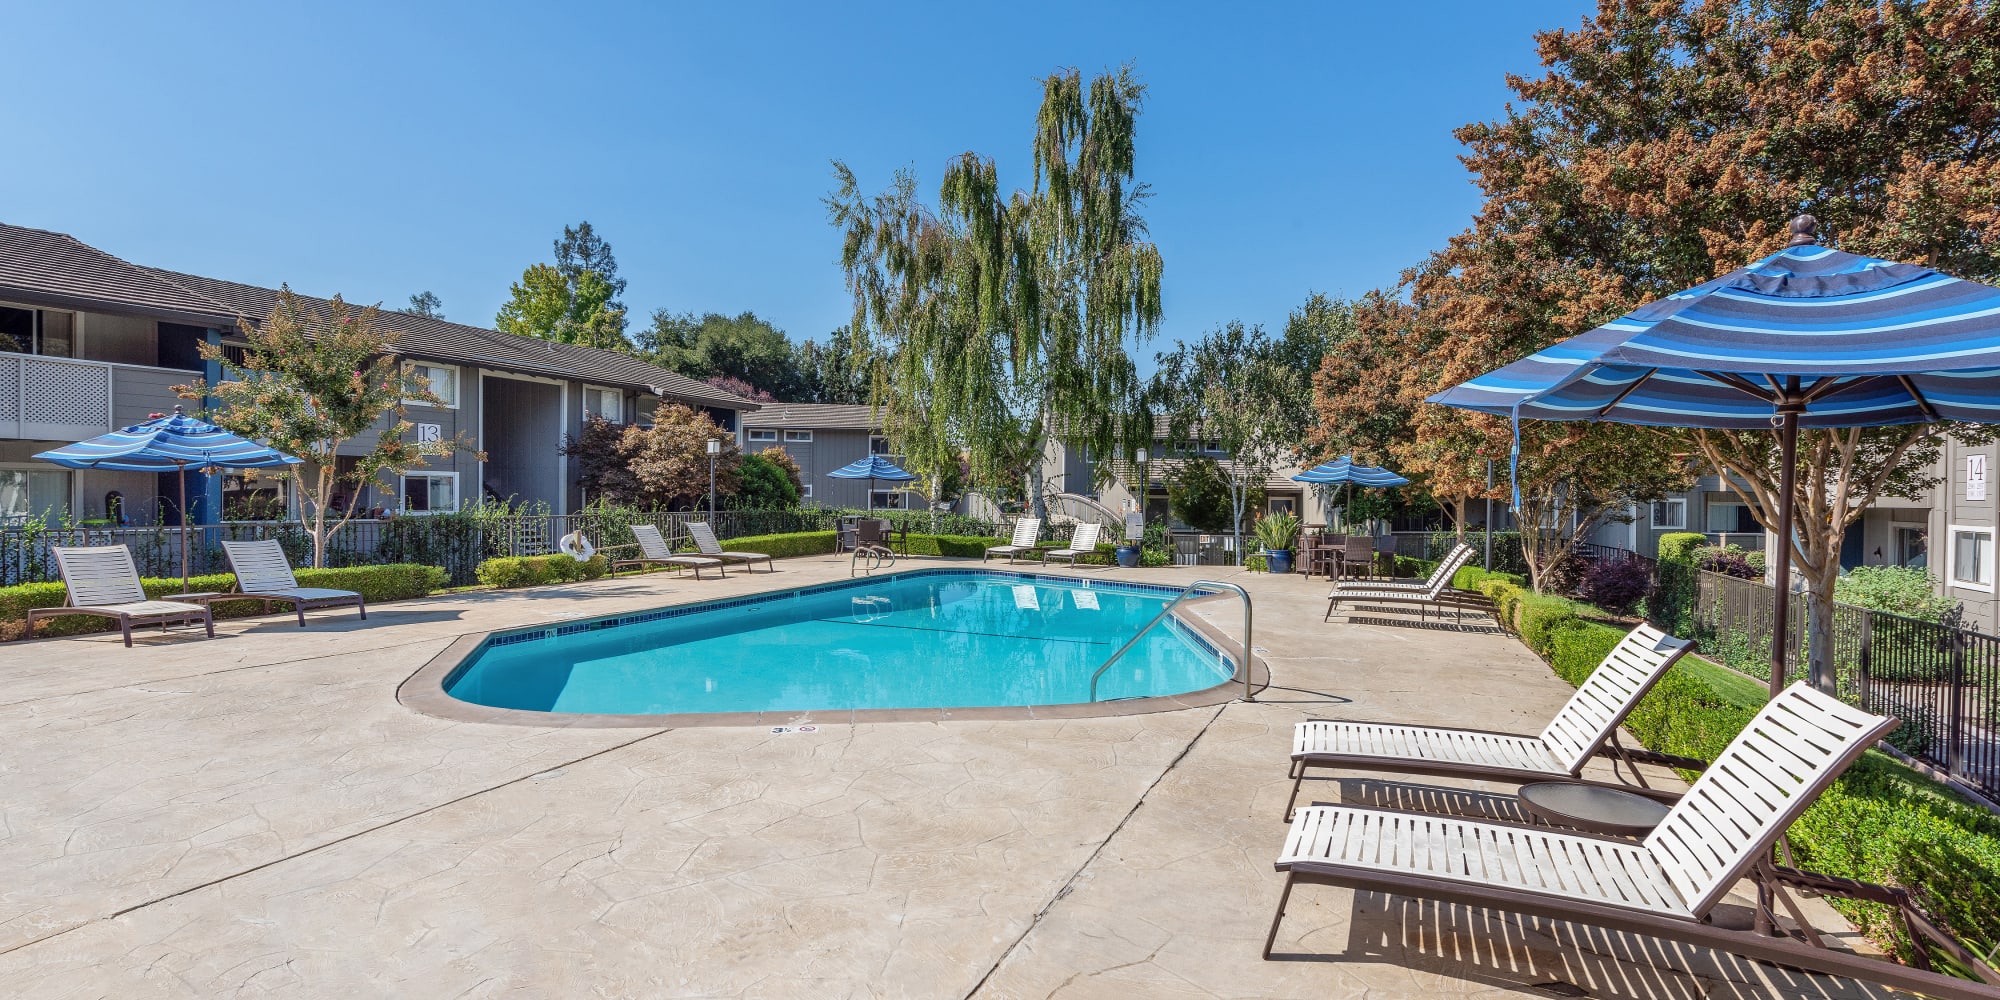 Pool at Shadow Oaks Apartment Homes in Cupertino, California